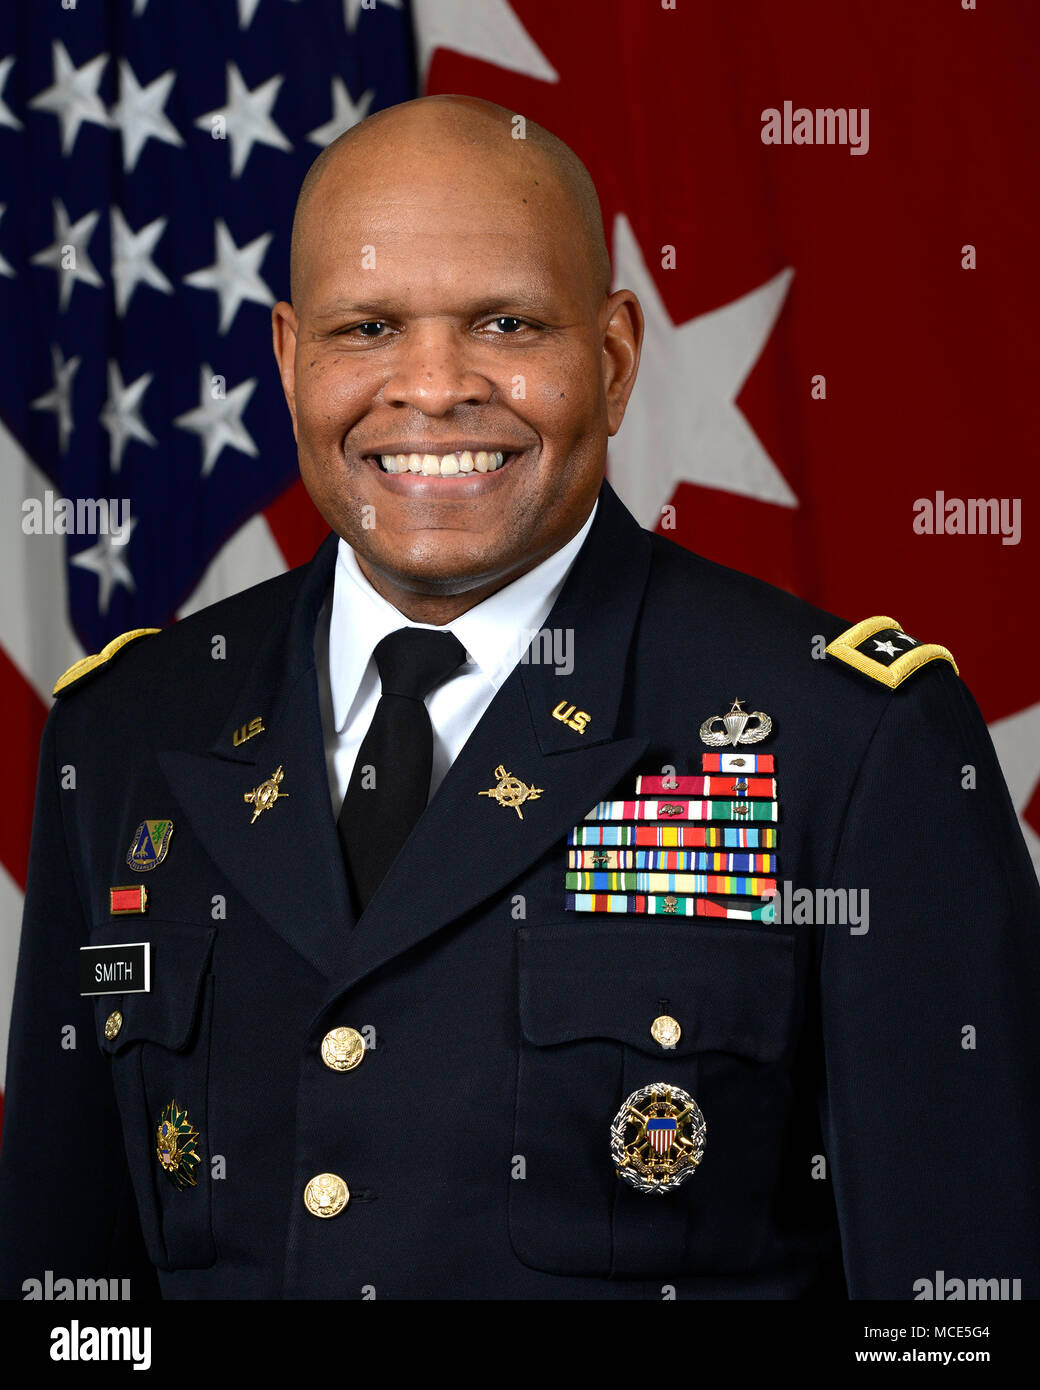 U.S. Army Lt. Gen. Leslie C. Smith, Inspector General of the Army, poses for a command portrait in the Army portrait studio at the Pentagon in Arlington, Va., Feb. 12, 2018.  (U.S. Army photo by Monica King) Stock Photo